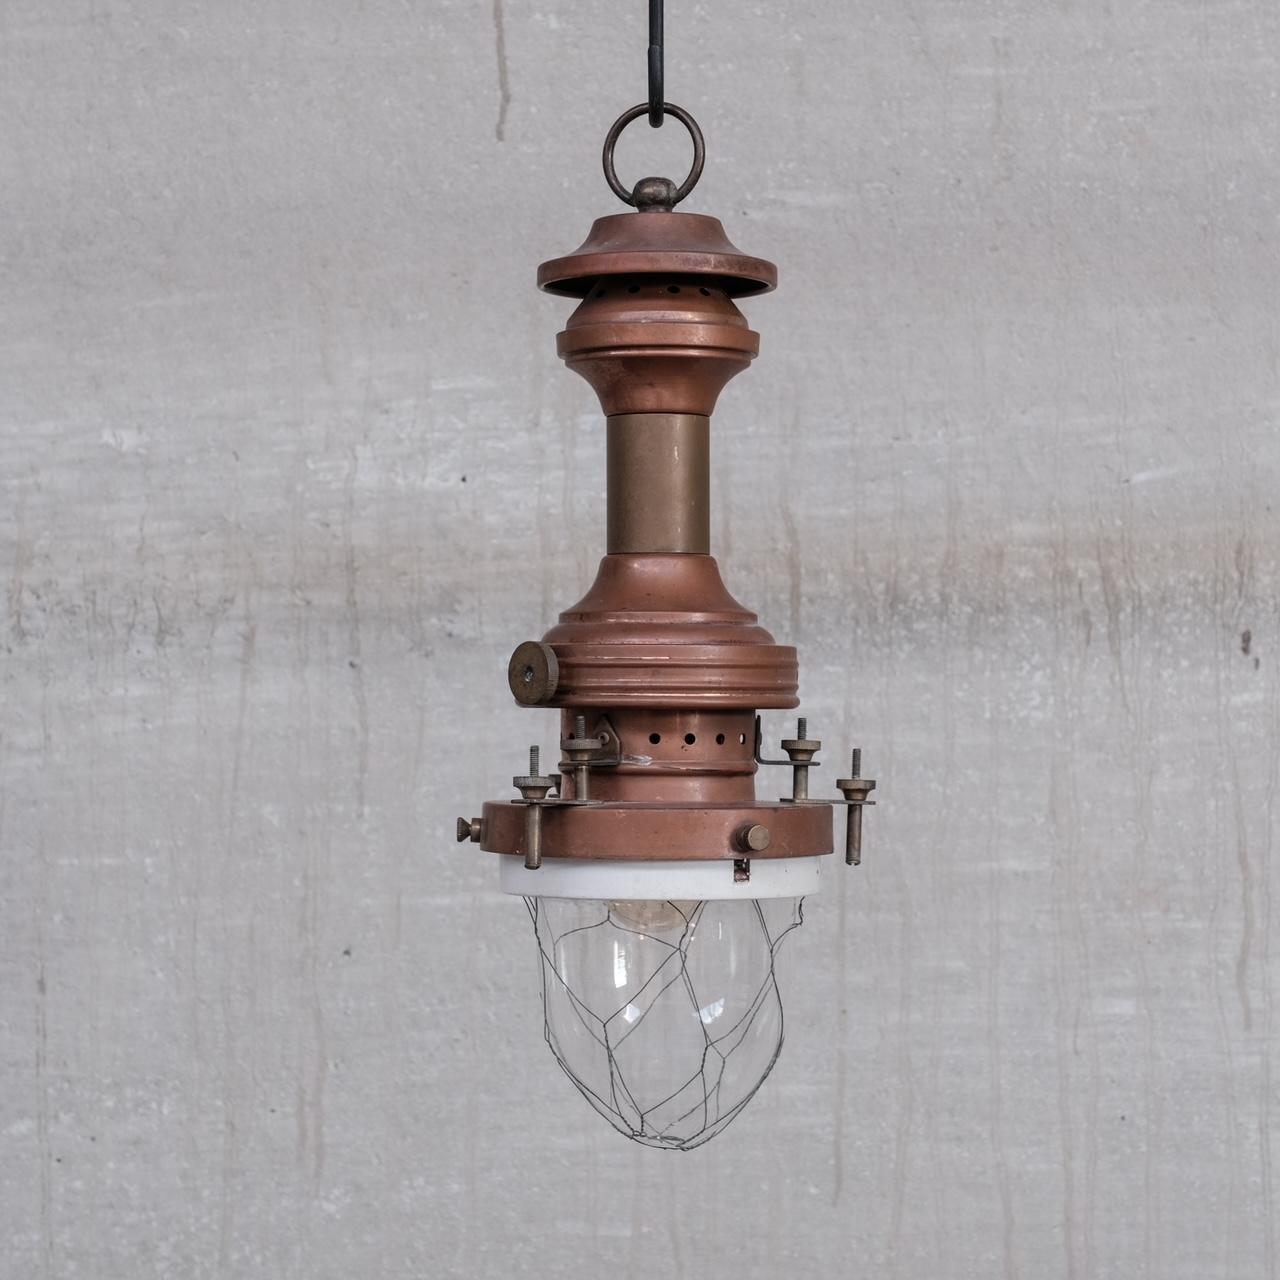 An early 20th century, brass and copper pendant light, with glass domed base encased in wire caging. 

France, c1930s. 

Good vintage condition, with authentic natural patina. 

No original chain or rose was retained, these are sourced easily